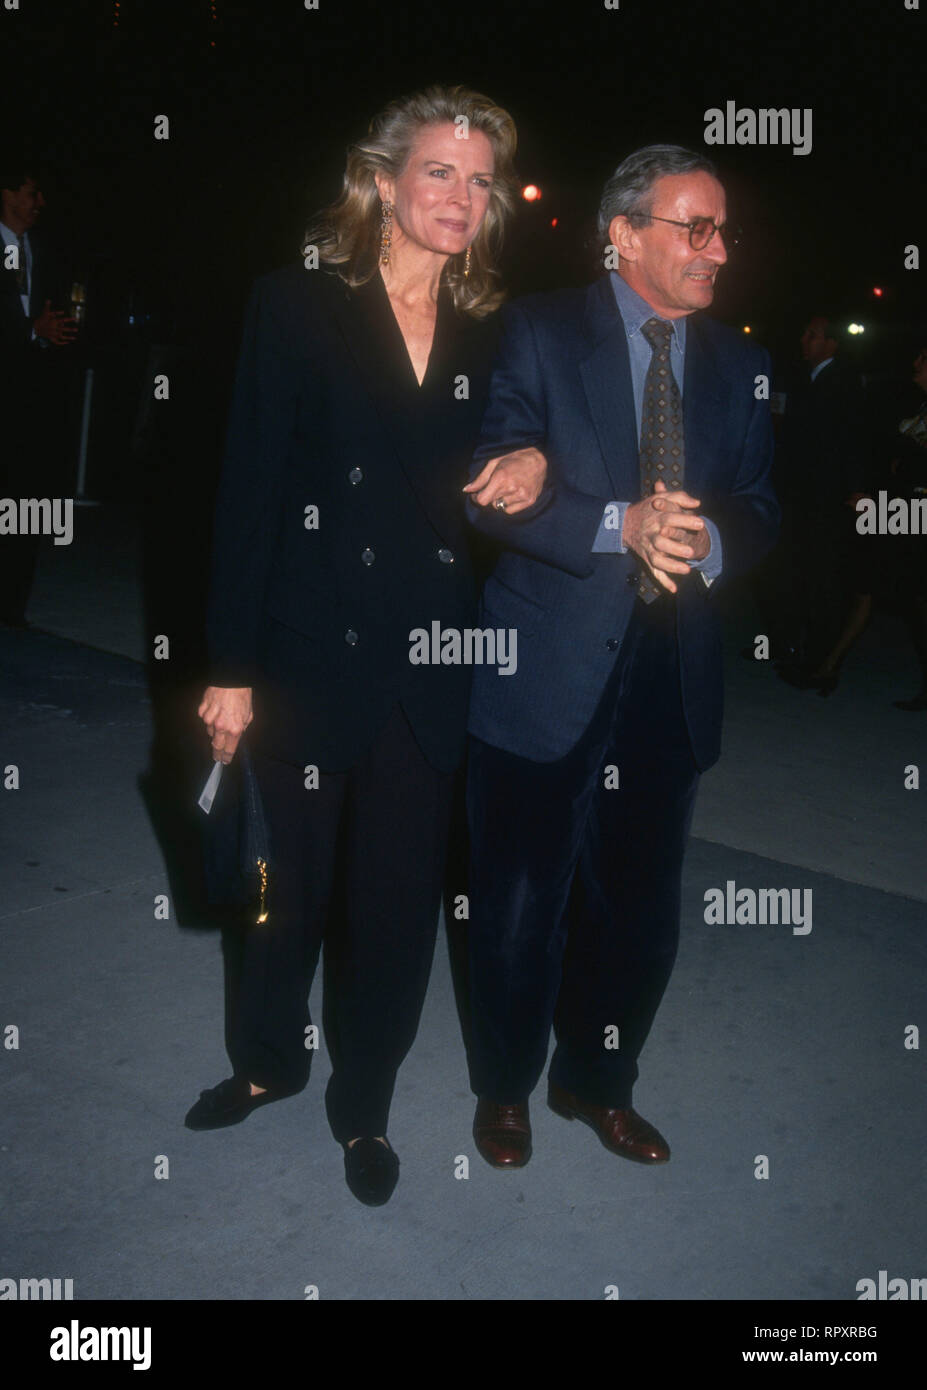 UNIVERSAL CITY, CA - JANUARY 27: Actress Candice Bergen and director Louis Malle attend APLA Commitment to Life VII Benefit on January 27, 1994 at Universal Studios in Universal City, California. Photo by Barry King/Alamy Stock Photo Stock Photo